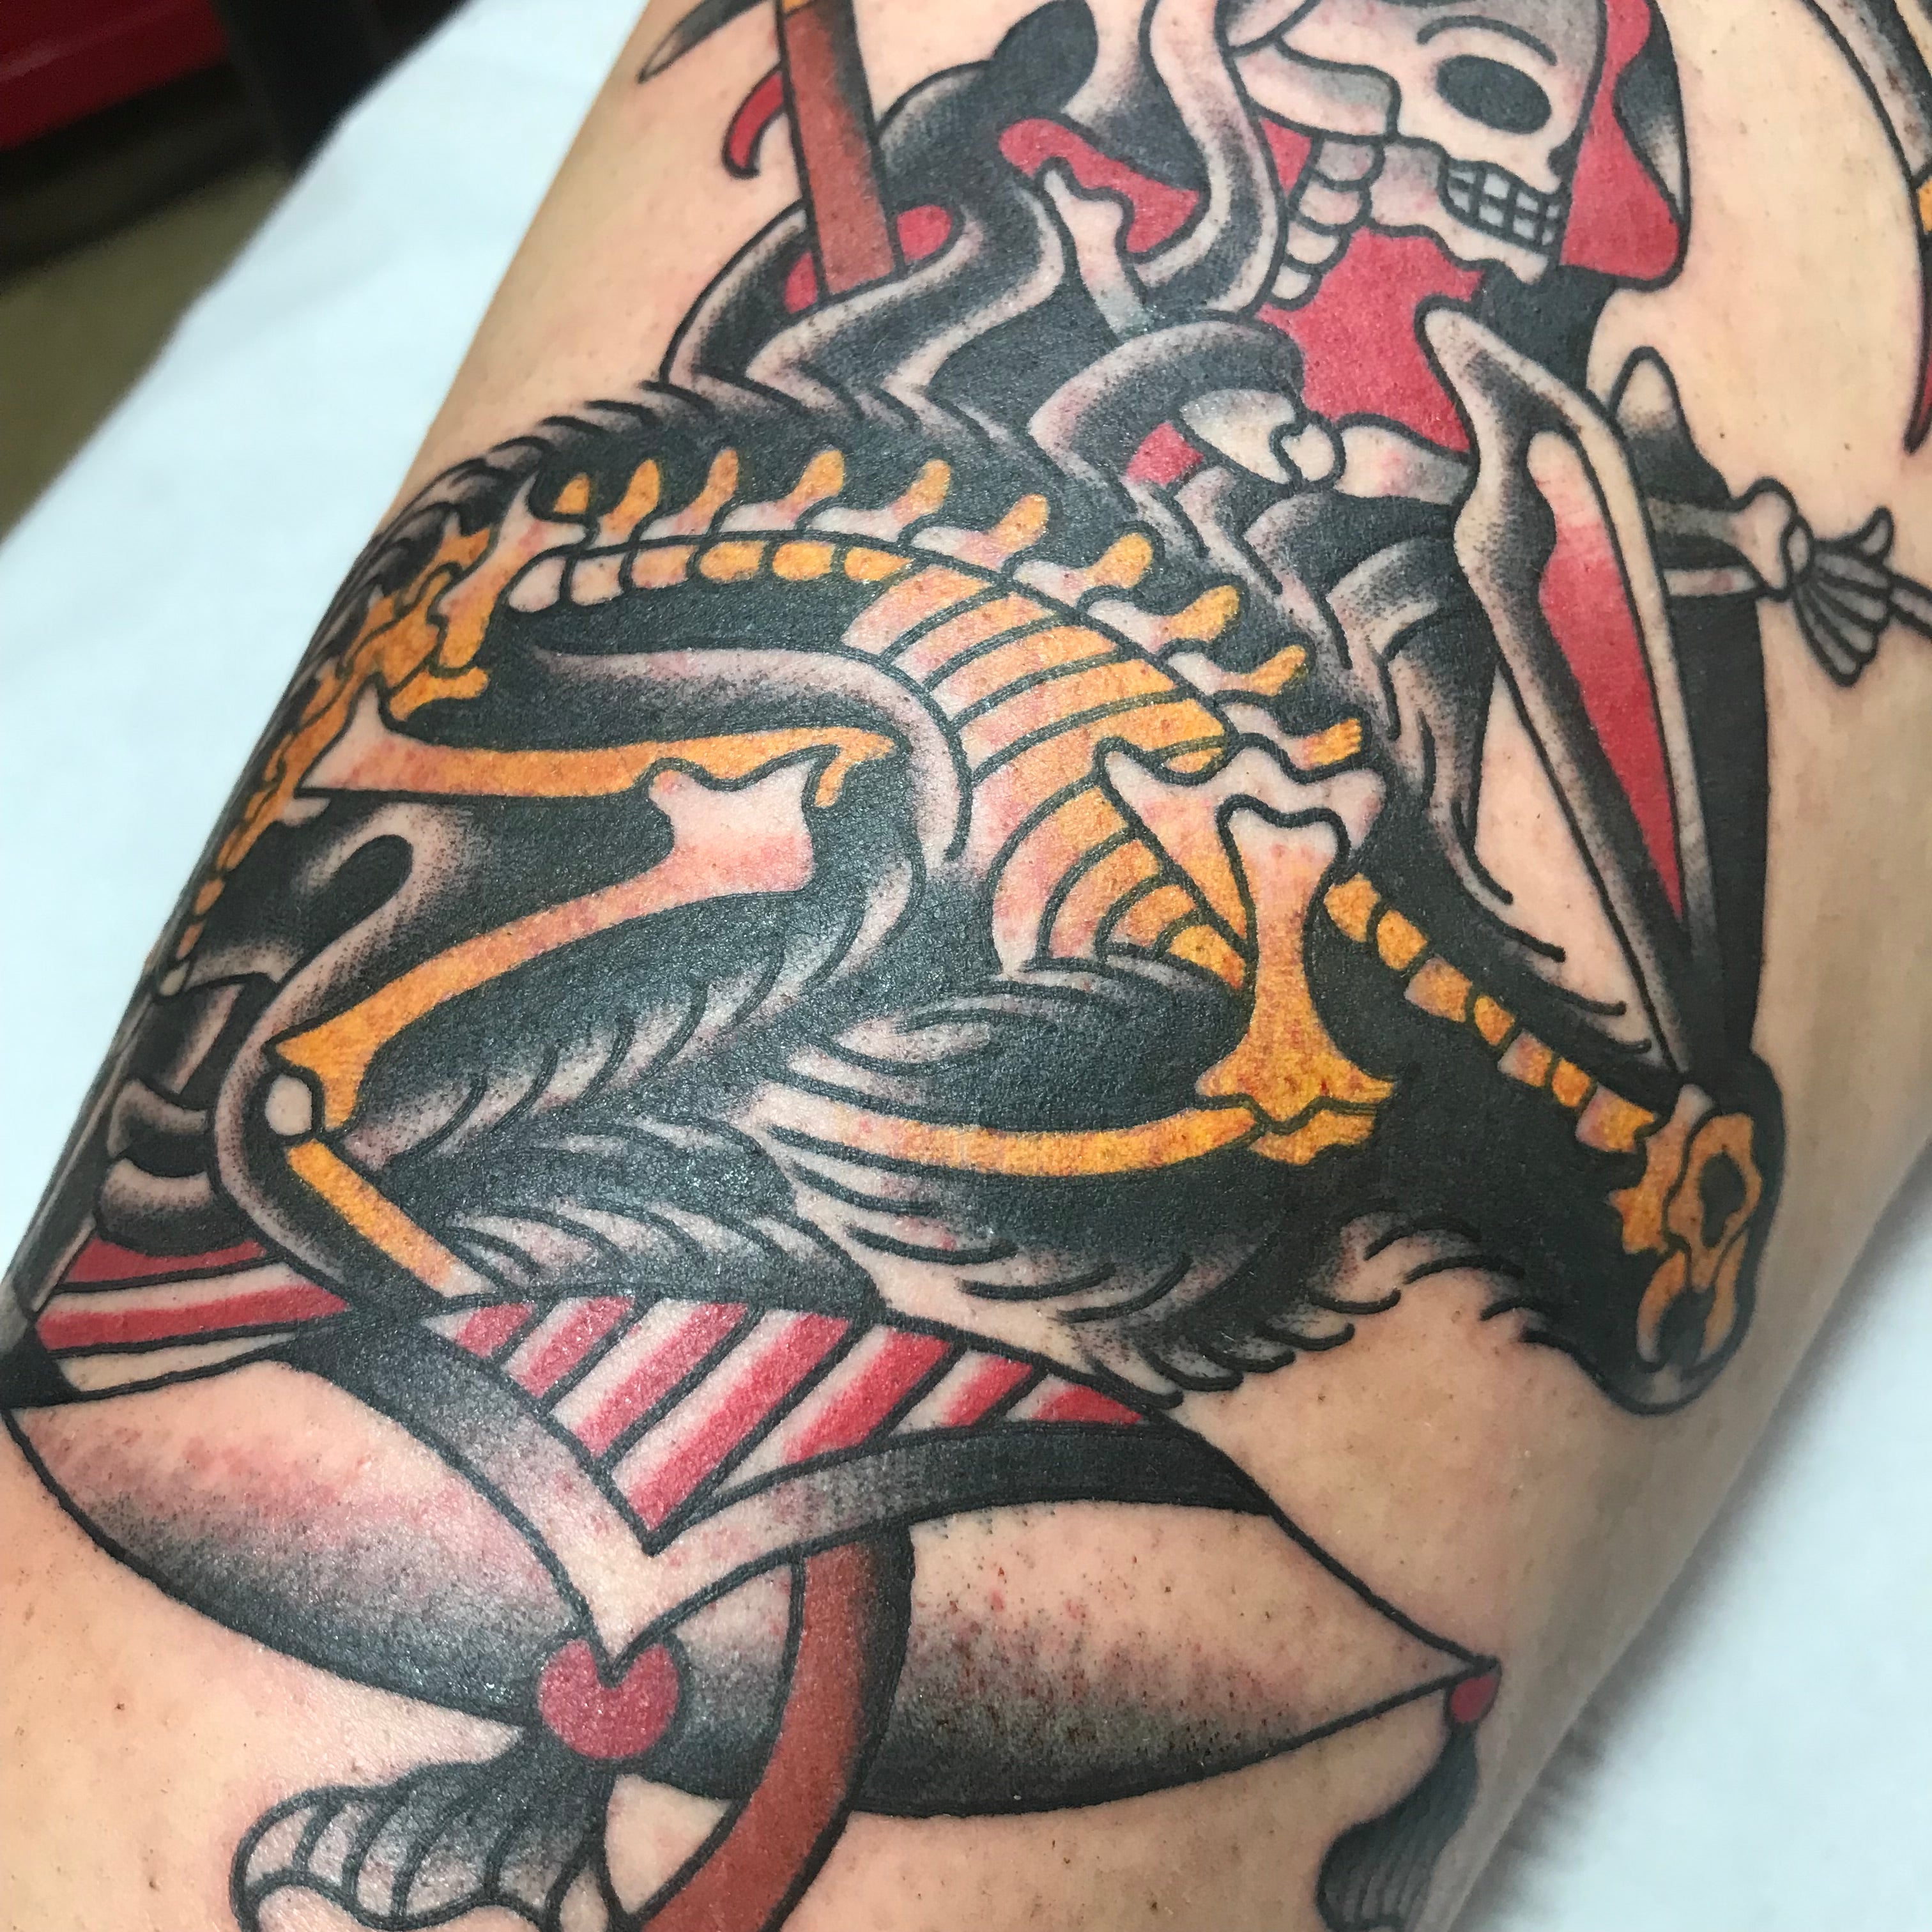 Tattoo Aftercare What You Need To Know To Avoid Badly Healed And Infected  Tattooshttpswwwalienstattoocomposttattoo aftercarewhatyouneedtoknowtoavoidbadlyhealedandinfectedtattoos